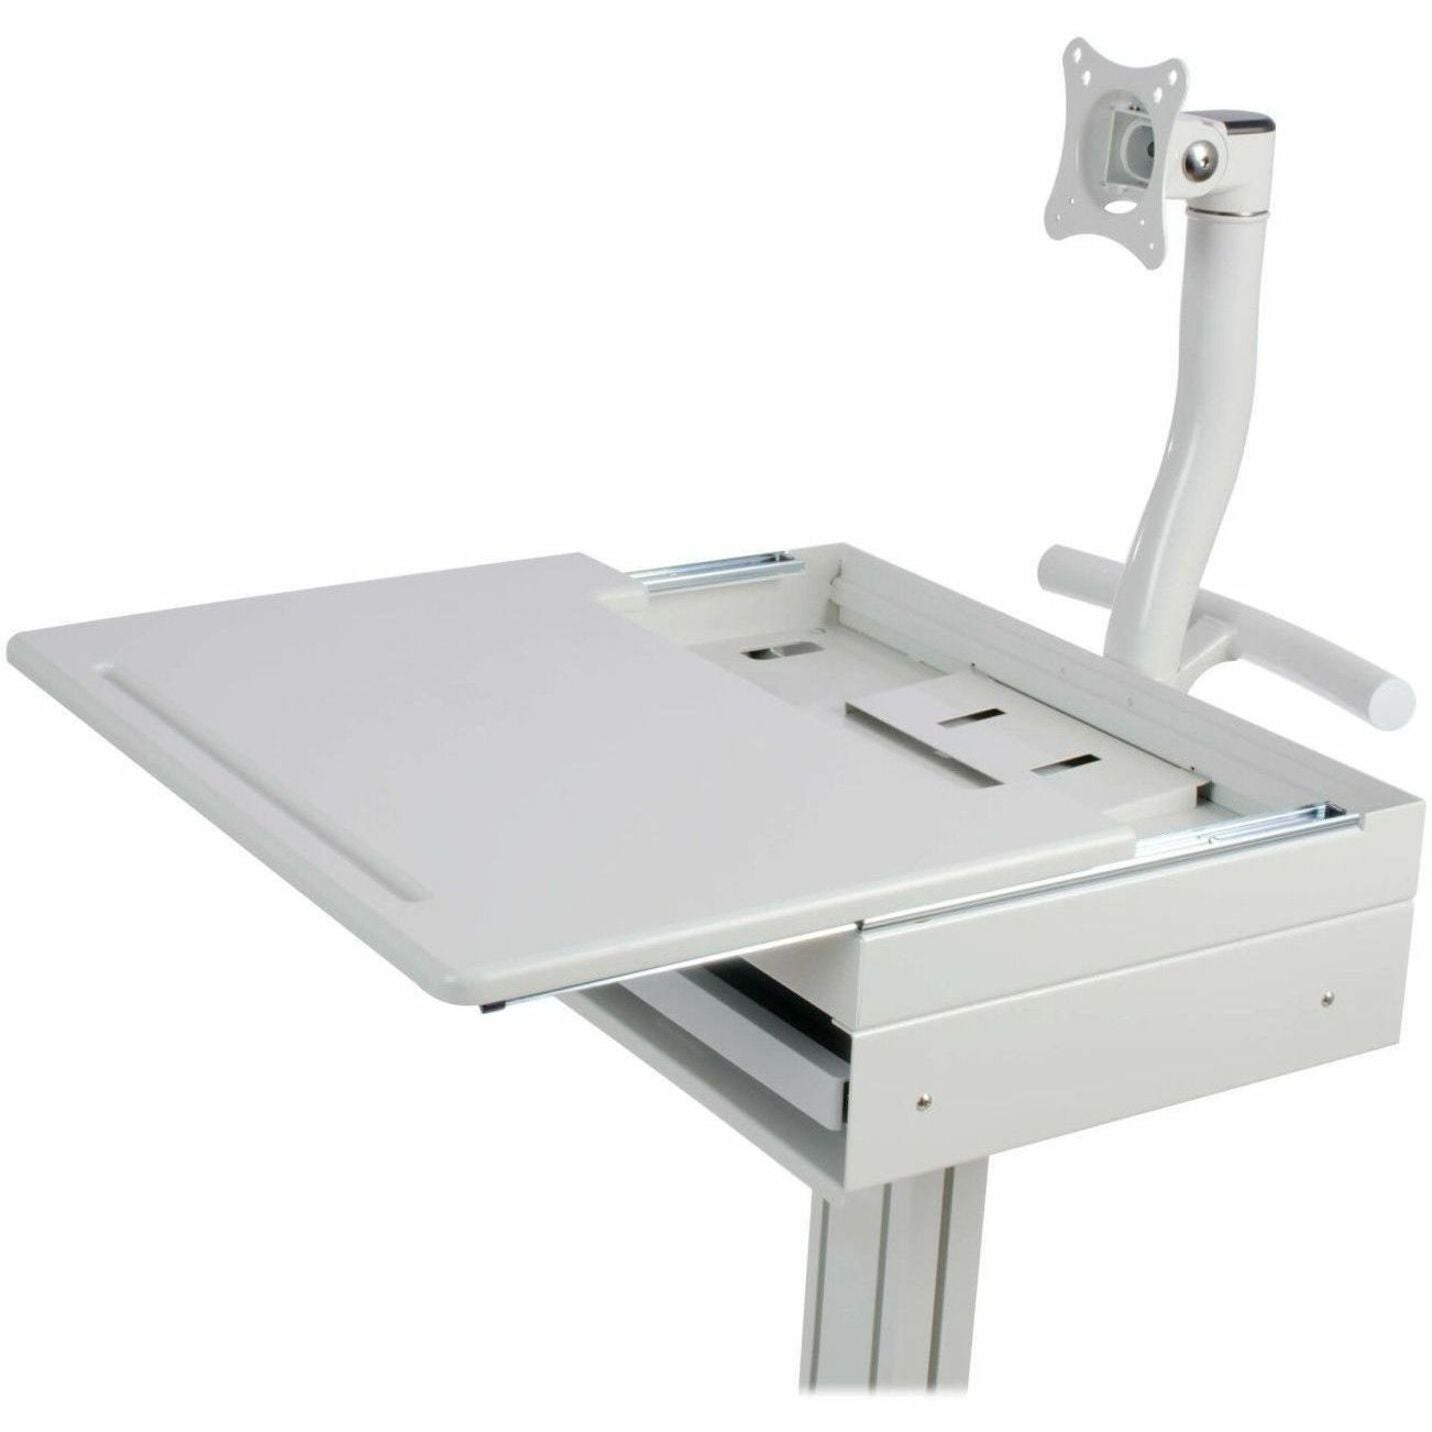 Tripp Lite WWSS1DWSTAA Mobile Workstation with Monitor Arm, Casters, Locking Drawer, TAA